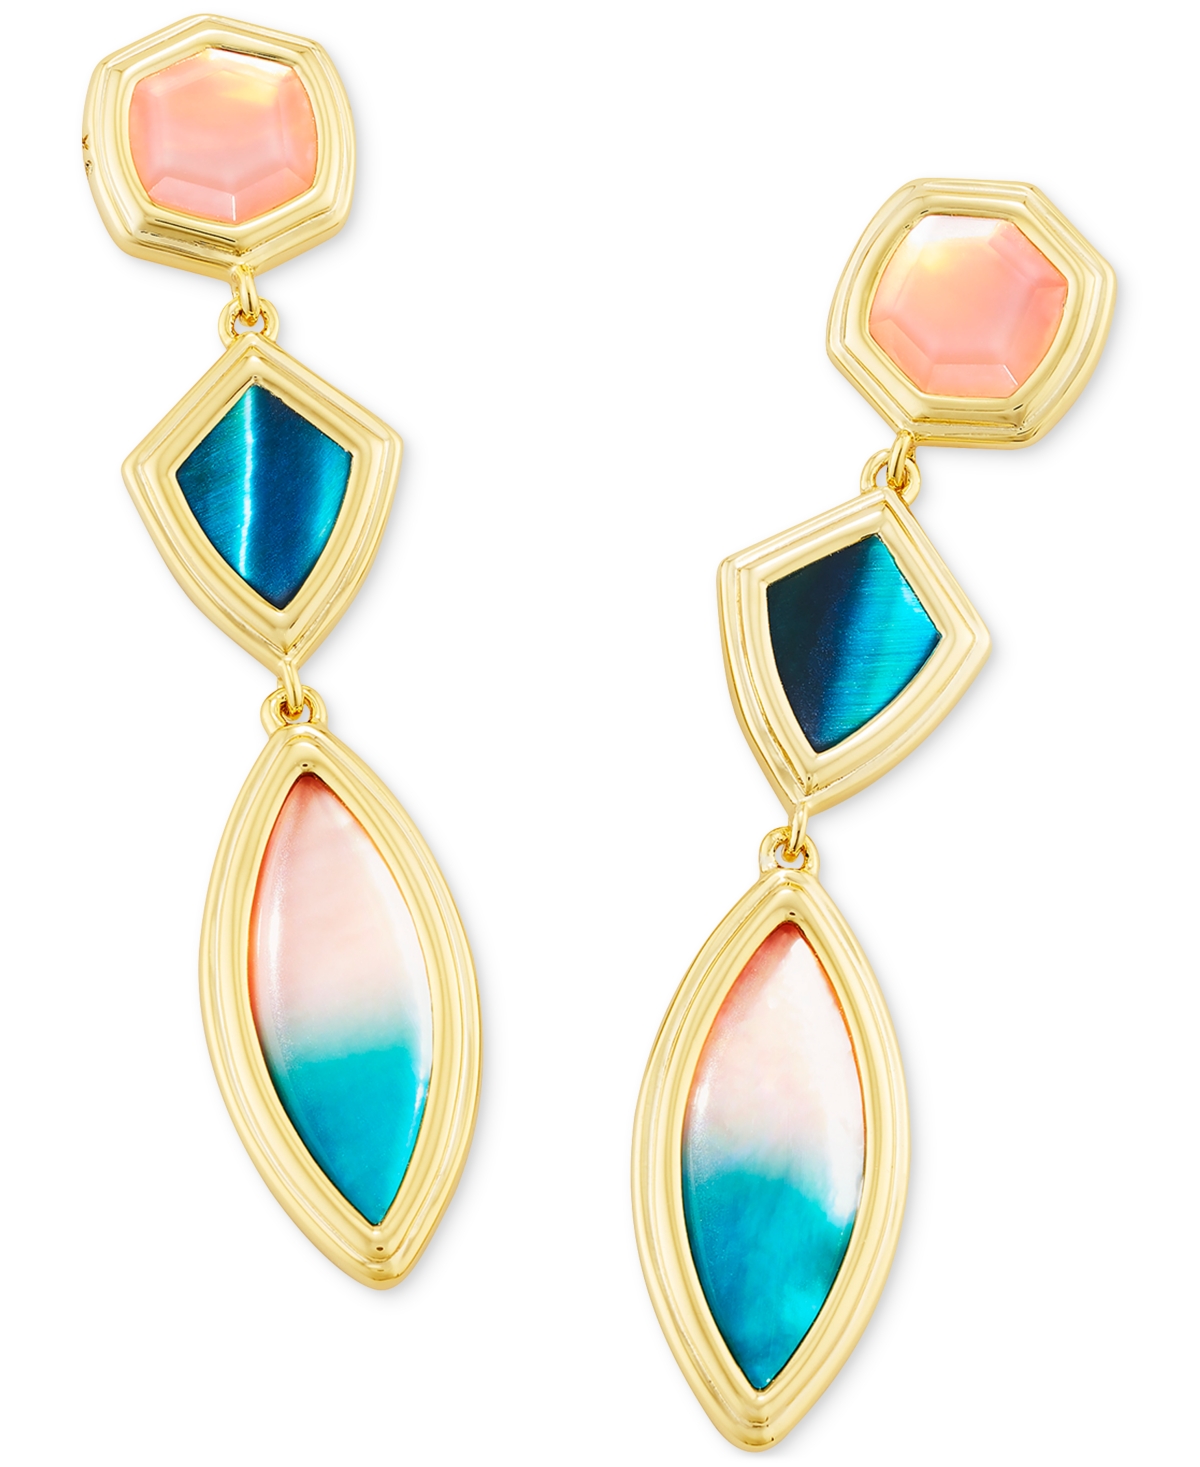 Kendra Scott 14k Gold-plated Mixed Stone Triple Drop Earrings In Teal Mix